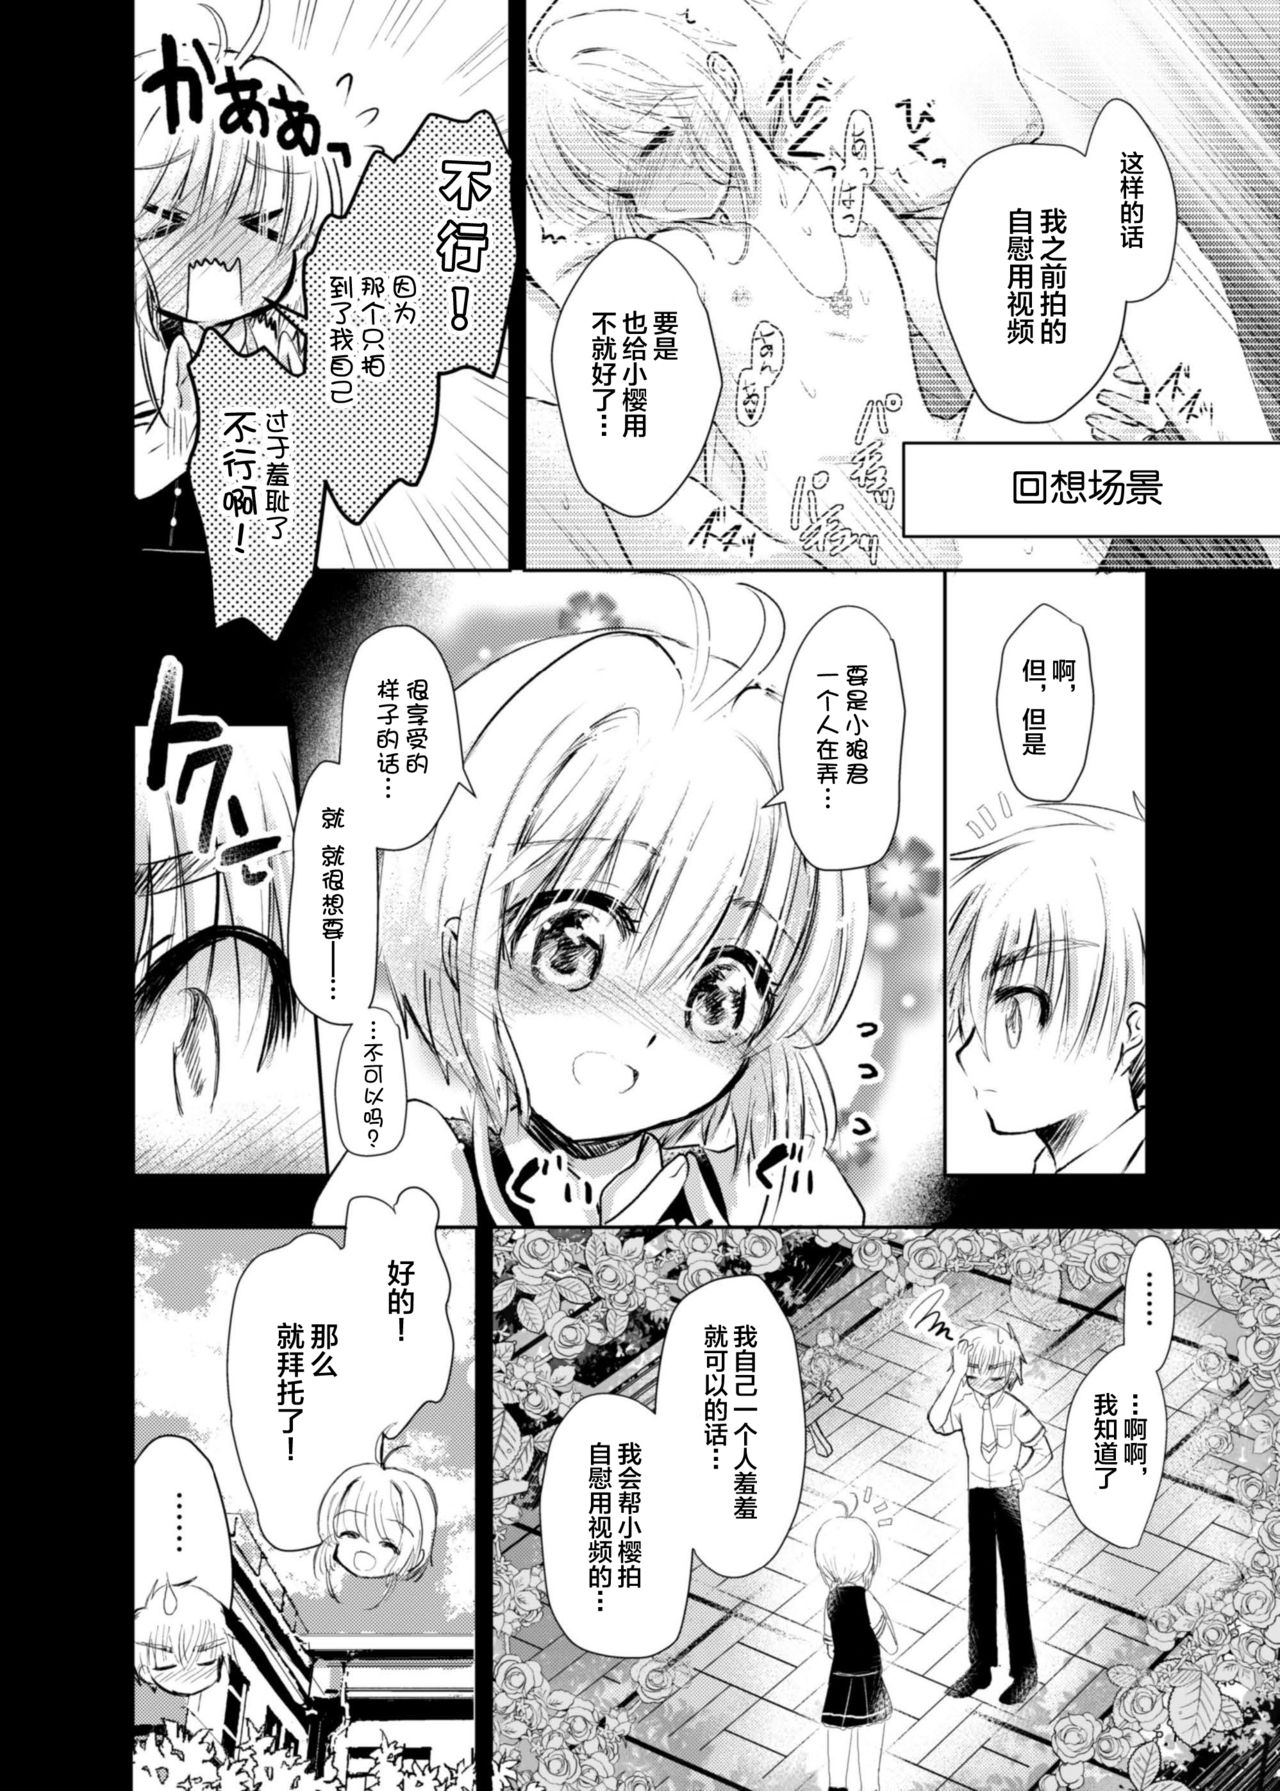 [Maple of Forest (Kaede Sago)] Give and Take (Cardcaptor Sakura) [Chinese] [新桥月白日语社] [Digital] page 17 full